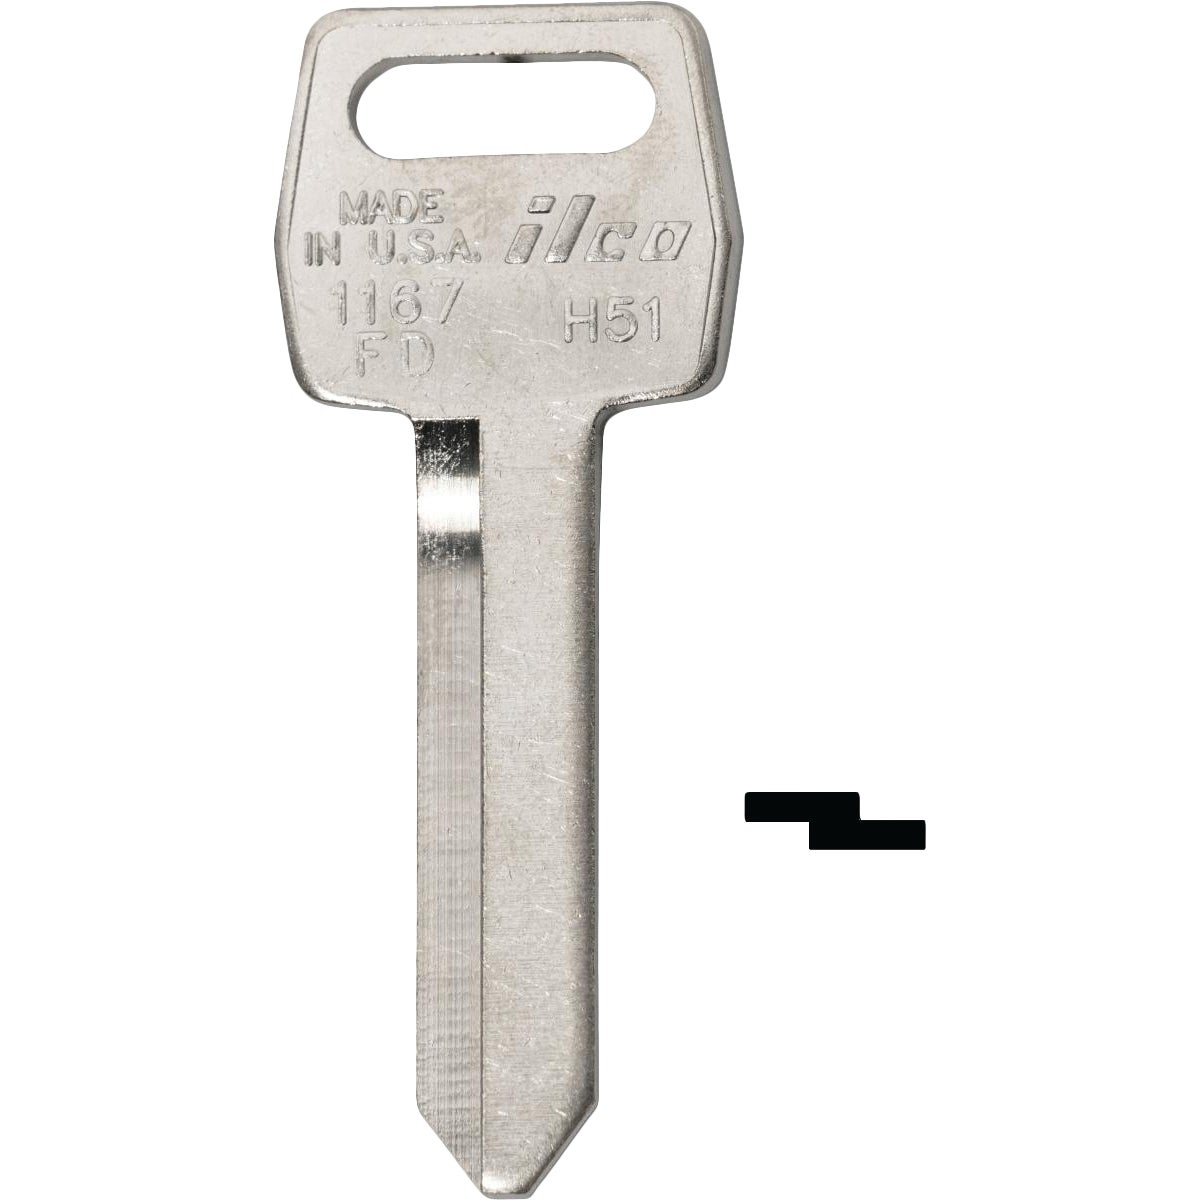 ILCO Ford Nickel Plated Automotive Key, H51 / 1167FD (10-Pack)